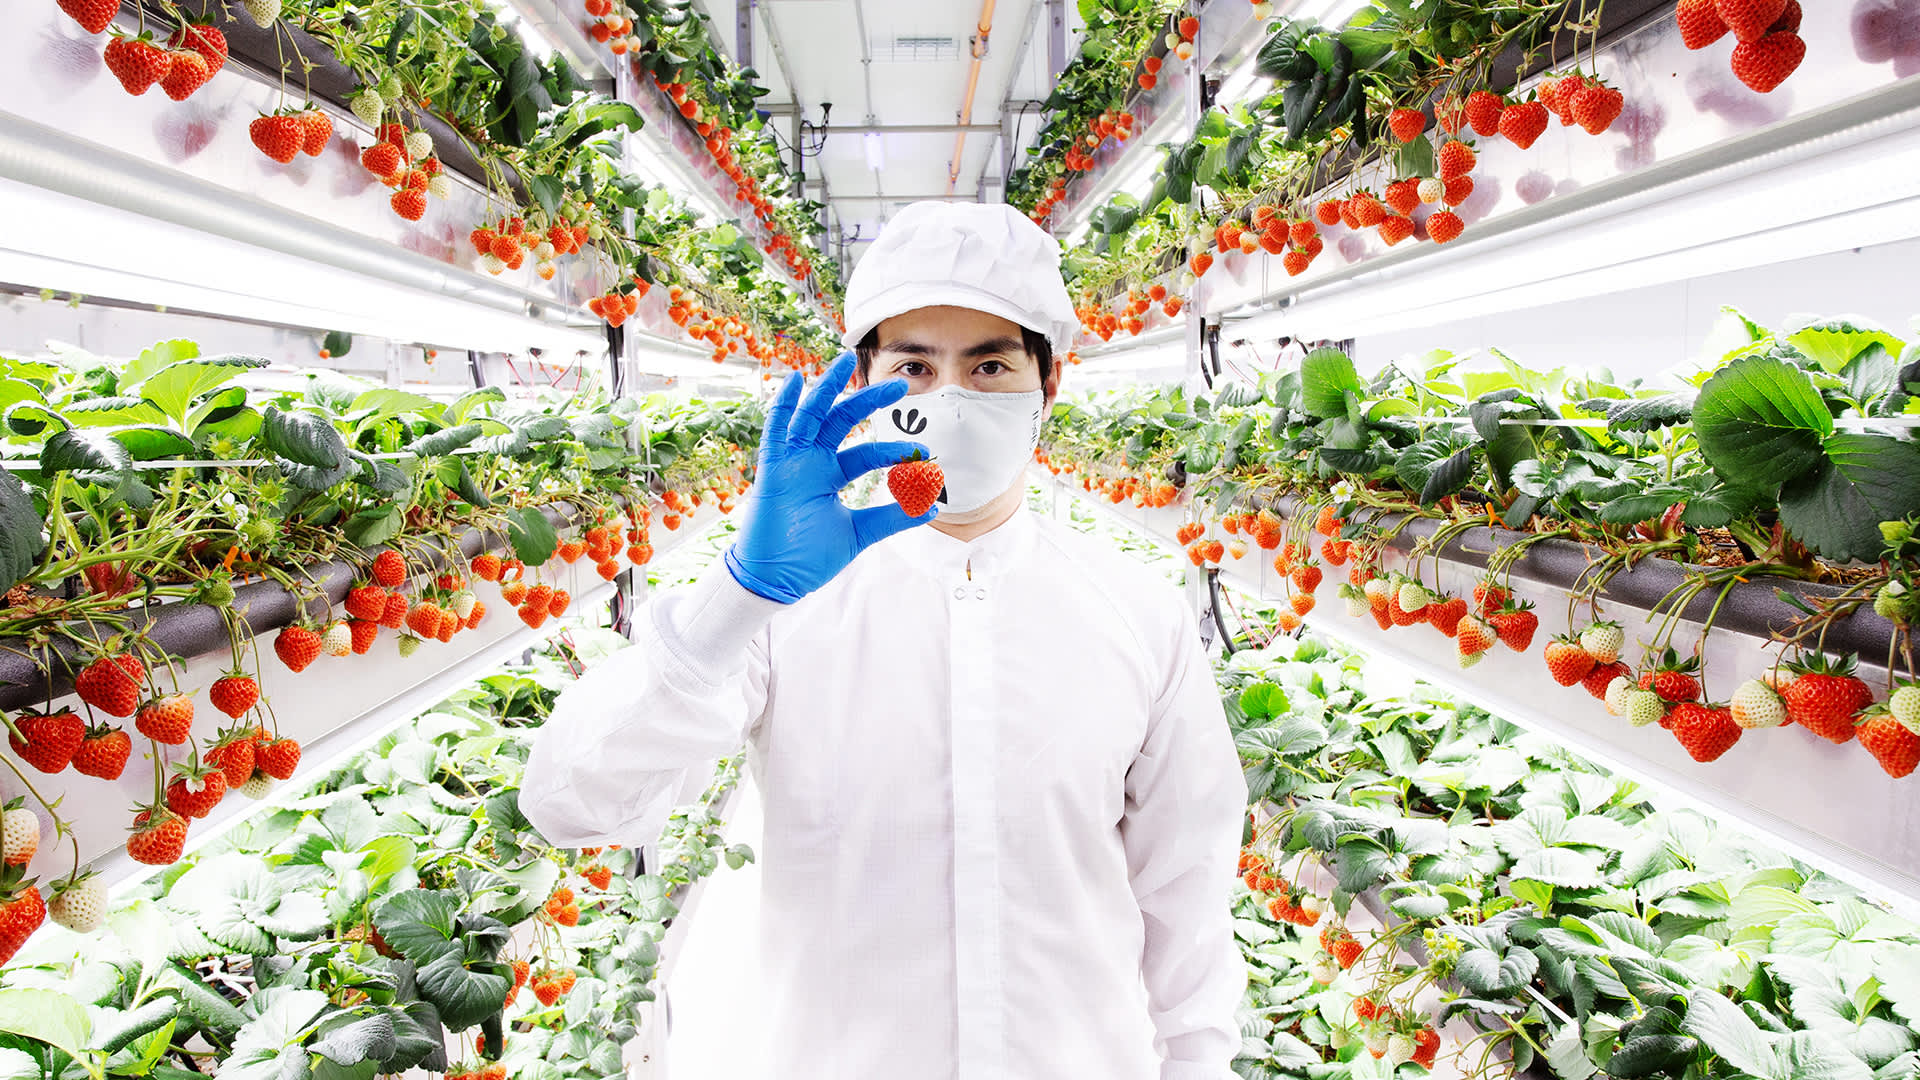 How Oishi’s vertical farms grow strawberries that sell for $ 20 per box